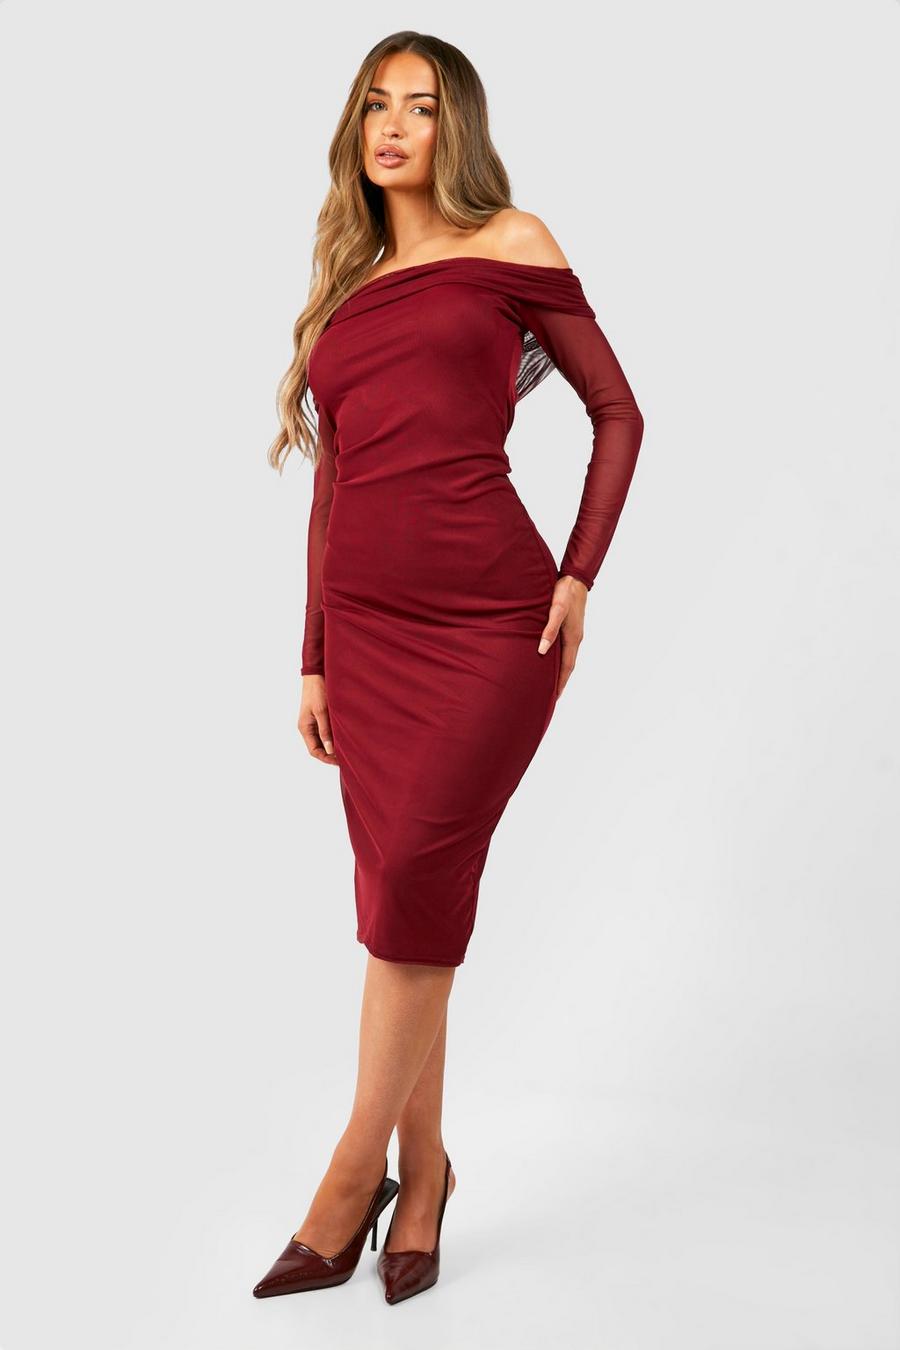 Berry All Occasion Dresses